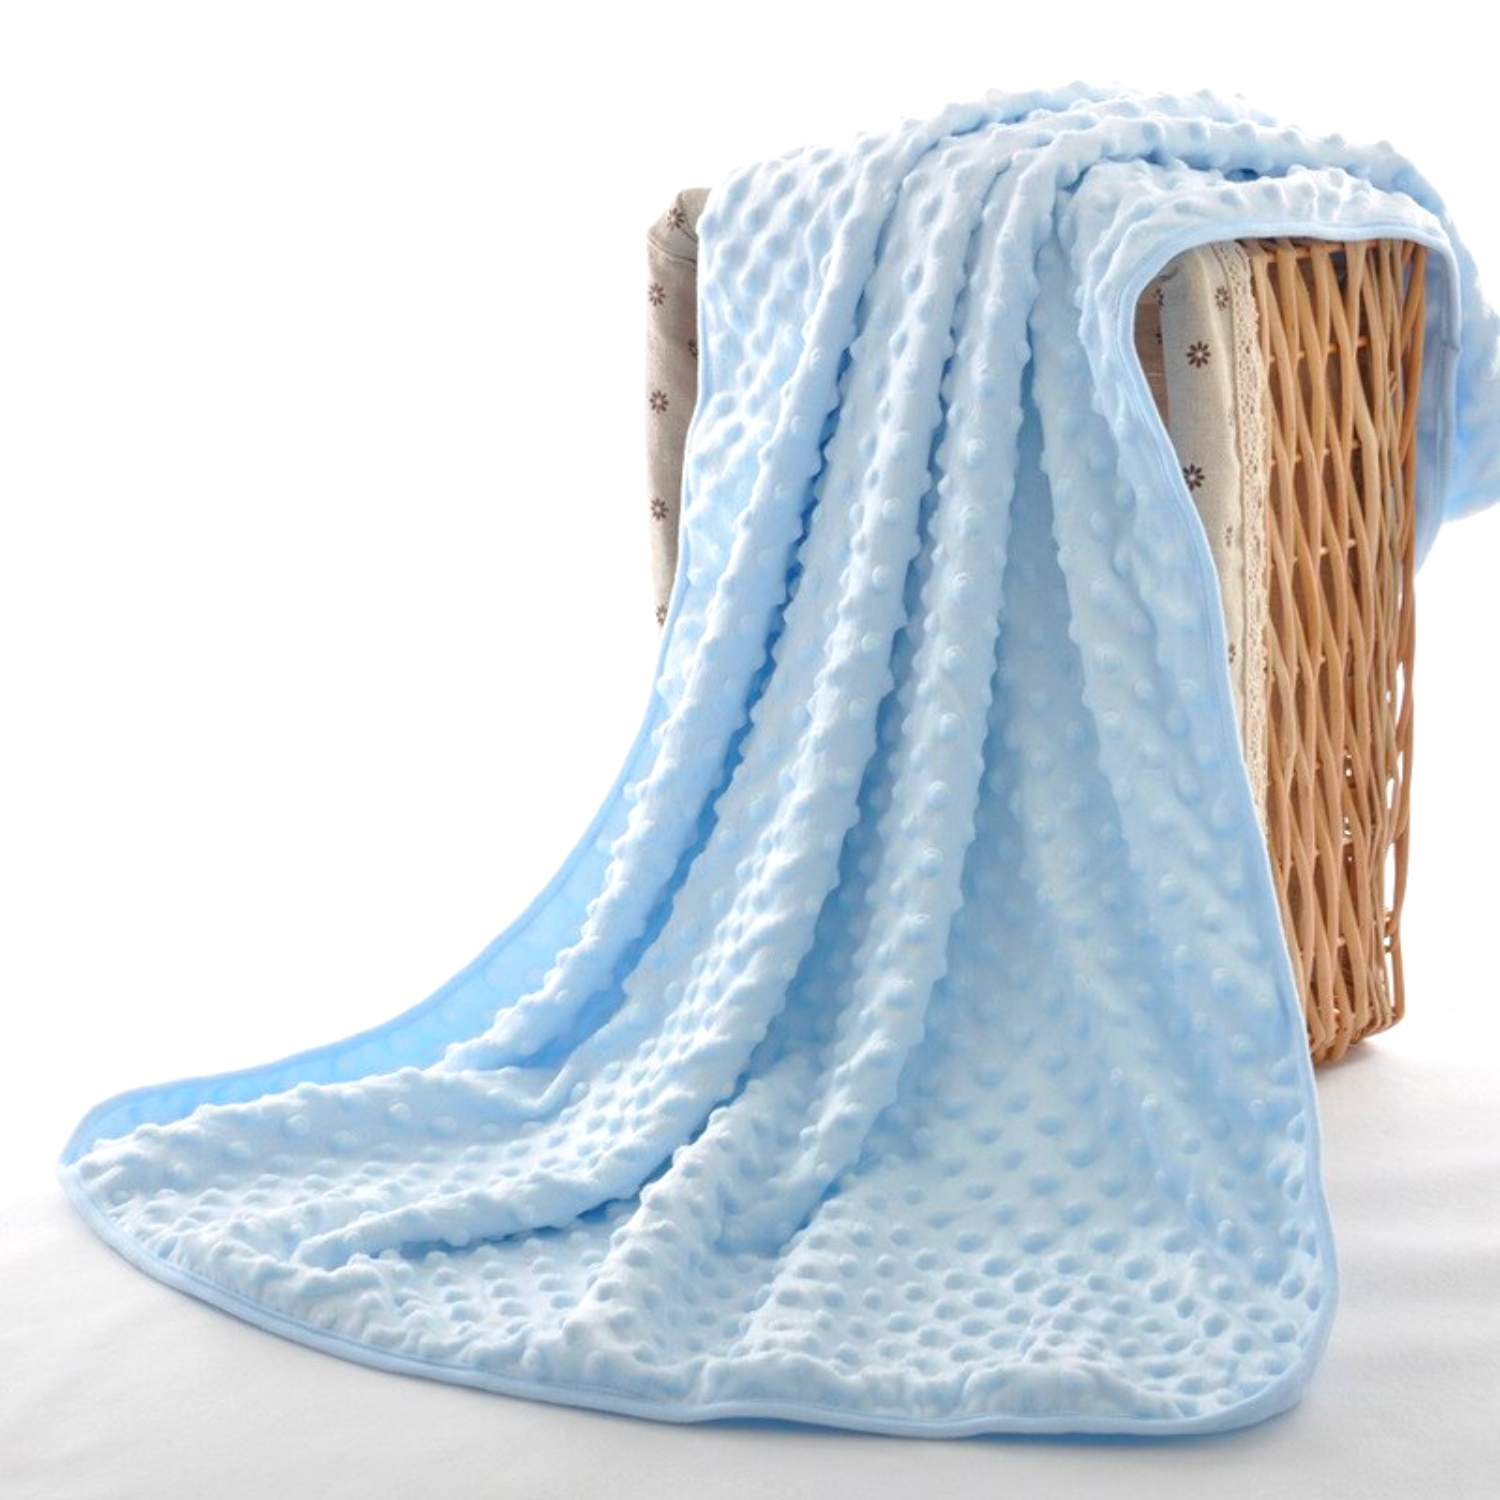 Baby Blanket Super Soft Fleece Minky with Double Layer Dot Backing Swaddling Wrap Cartoon Printed Receiving Blankets 